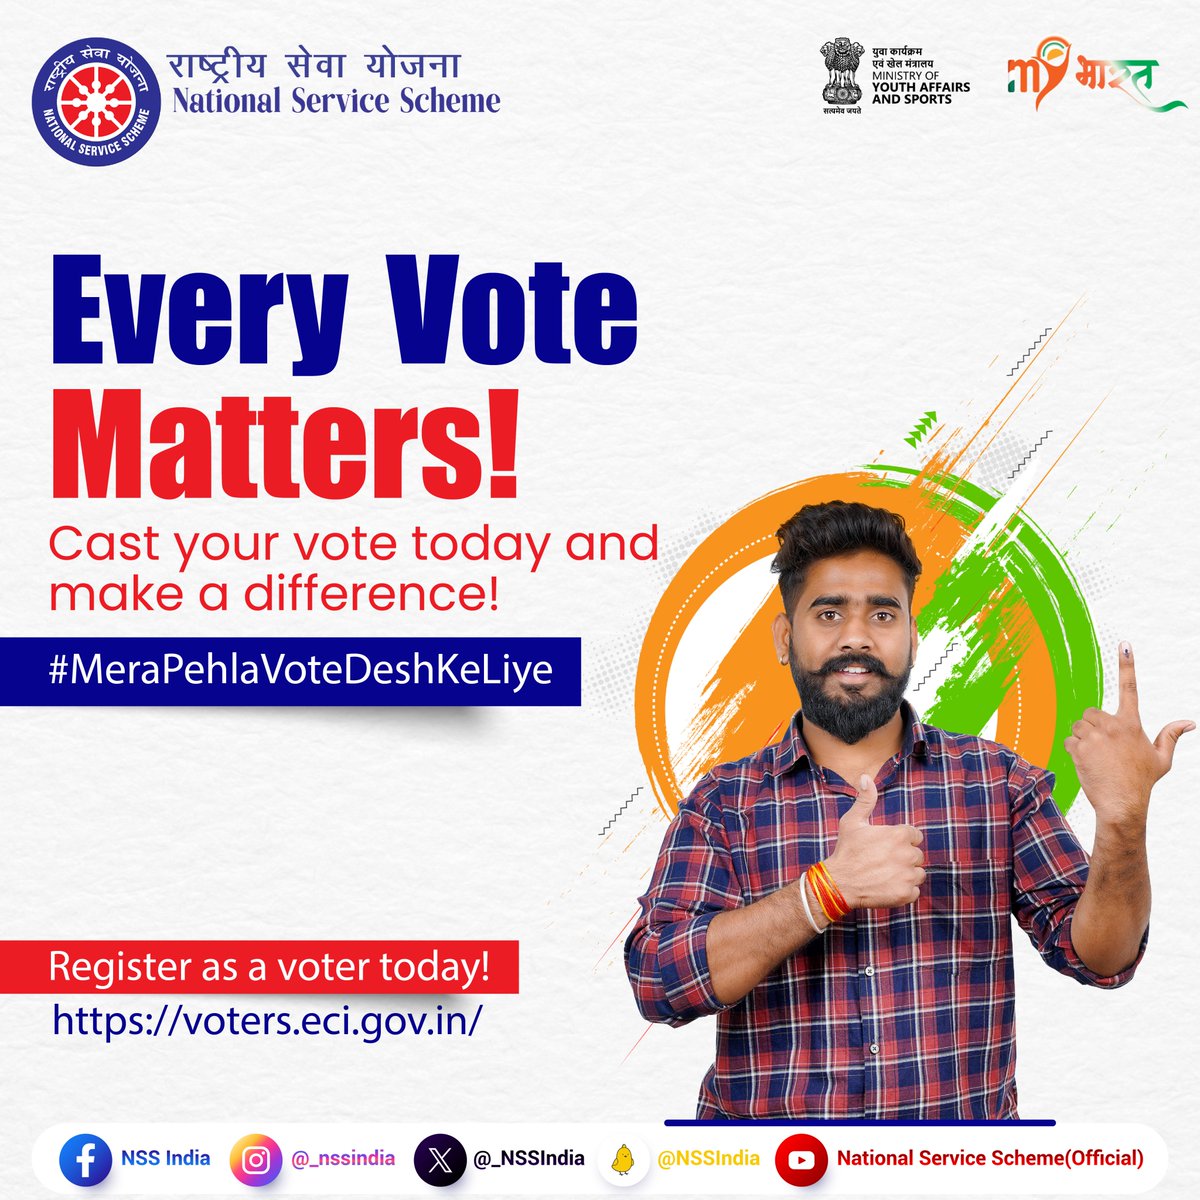 Don't sit back, cast your vote today and be a part of the change you wish to see. Your first vote is not just a right, it's a powerful statement. Make it count! #voterawareness #MeraPehlaVoteDeshKeLiye #Vote4Sure